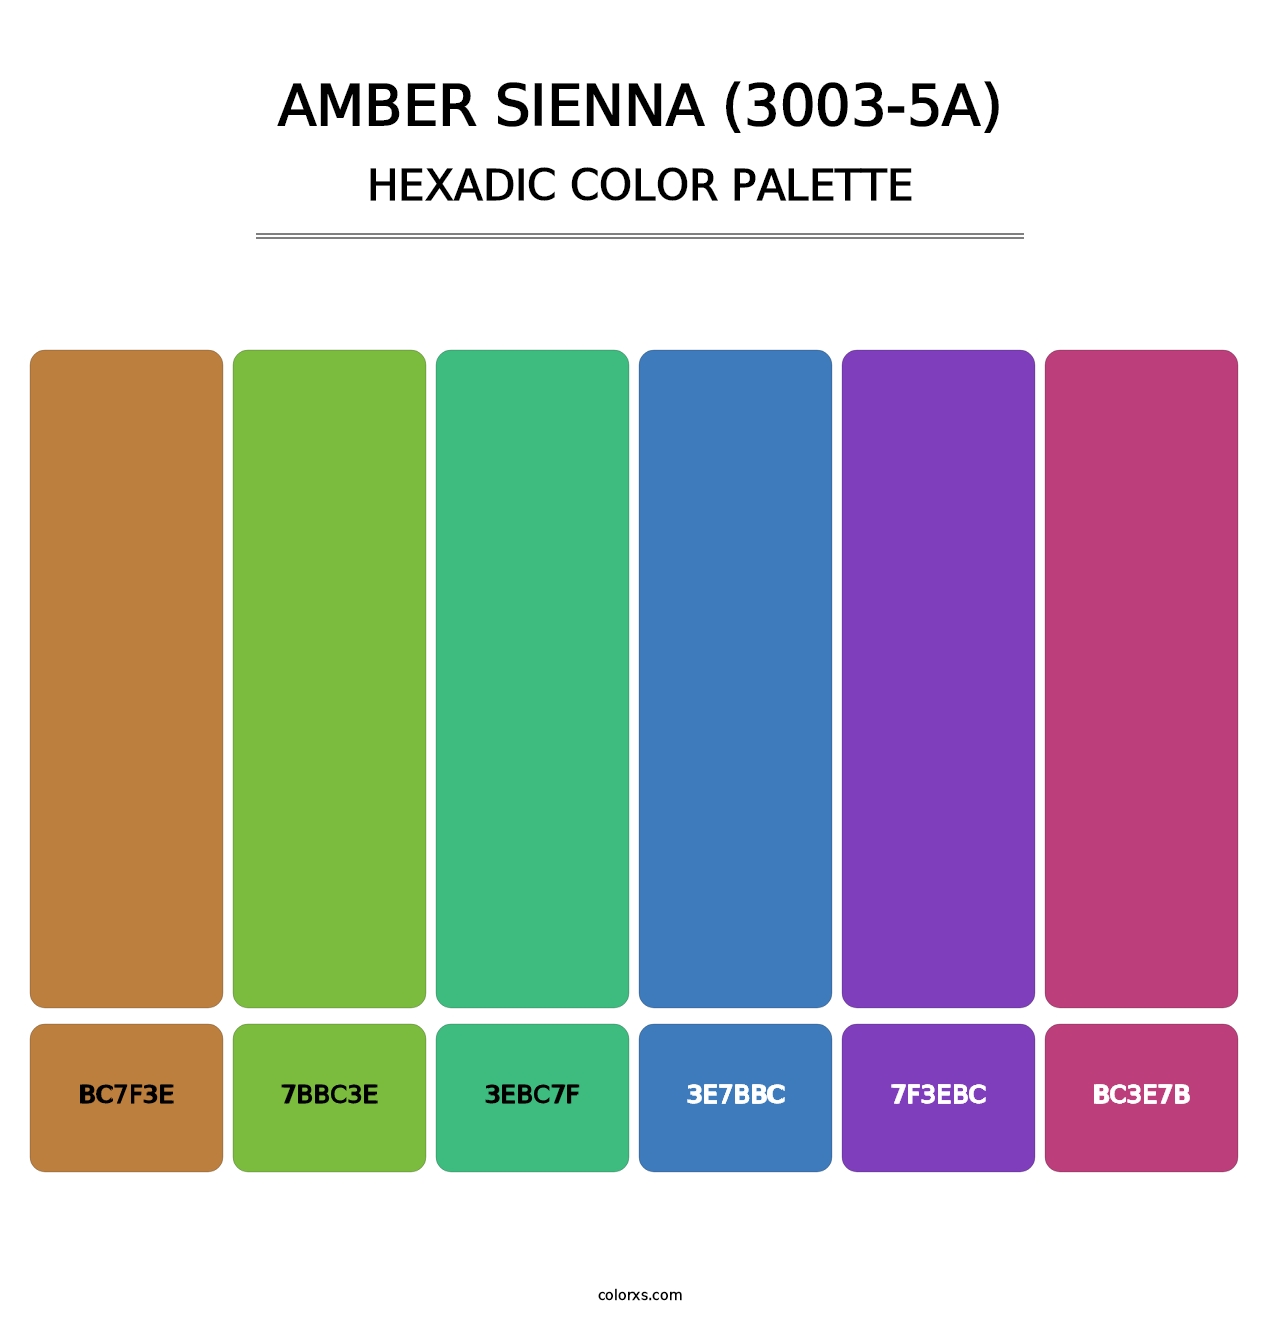 Amber Sienna (3003-5A) - Hexadic Color Palette